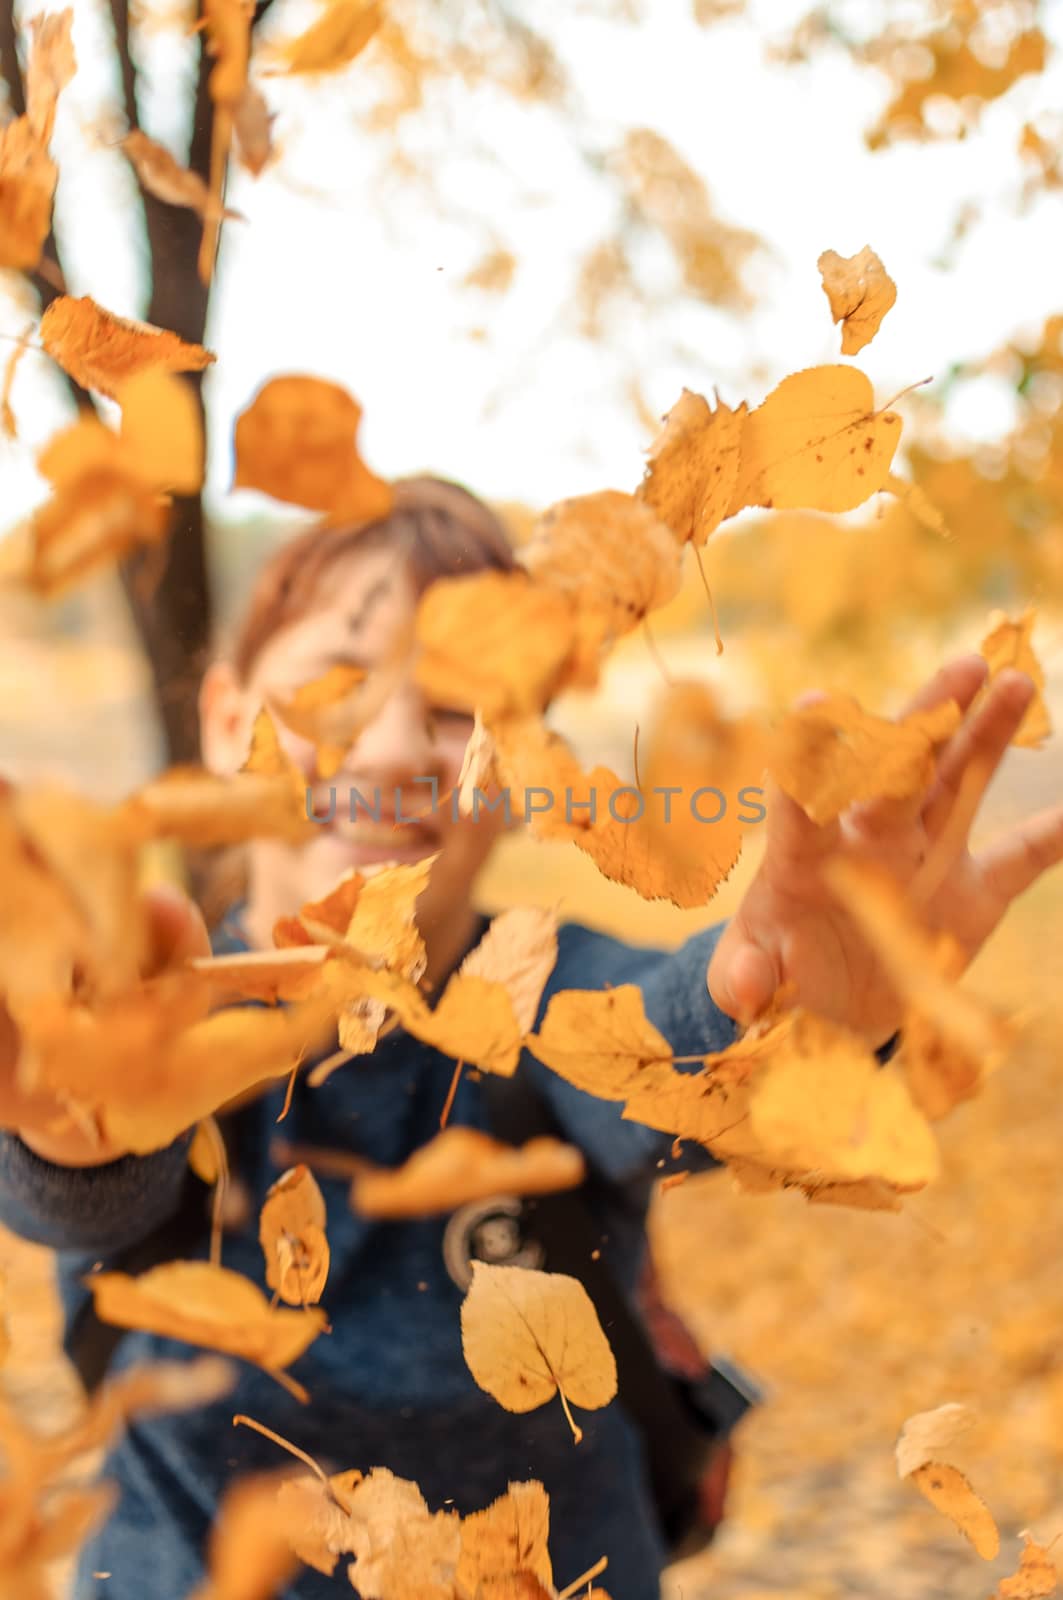 happy child playing with leaves in autumn in the forest. Girl Throwing Dry Leaves into Camera.Seasonal Outdoor Activities with Children. Capture lifestyle on a walk. by Alla_Morozova93